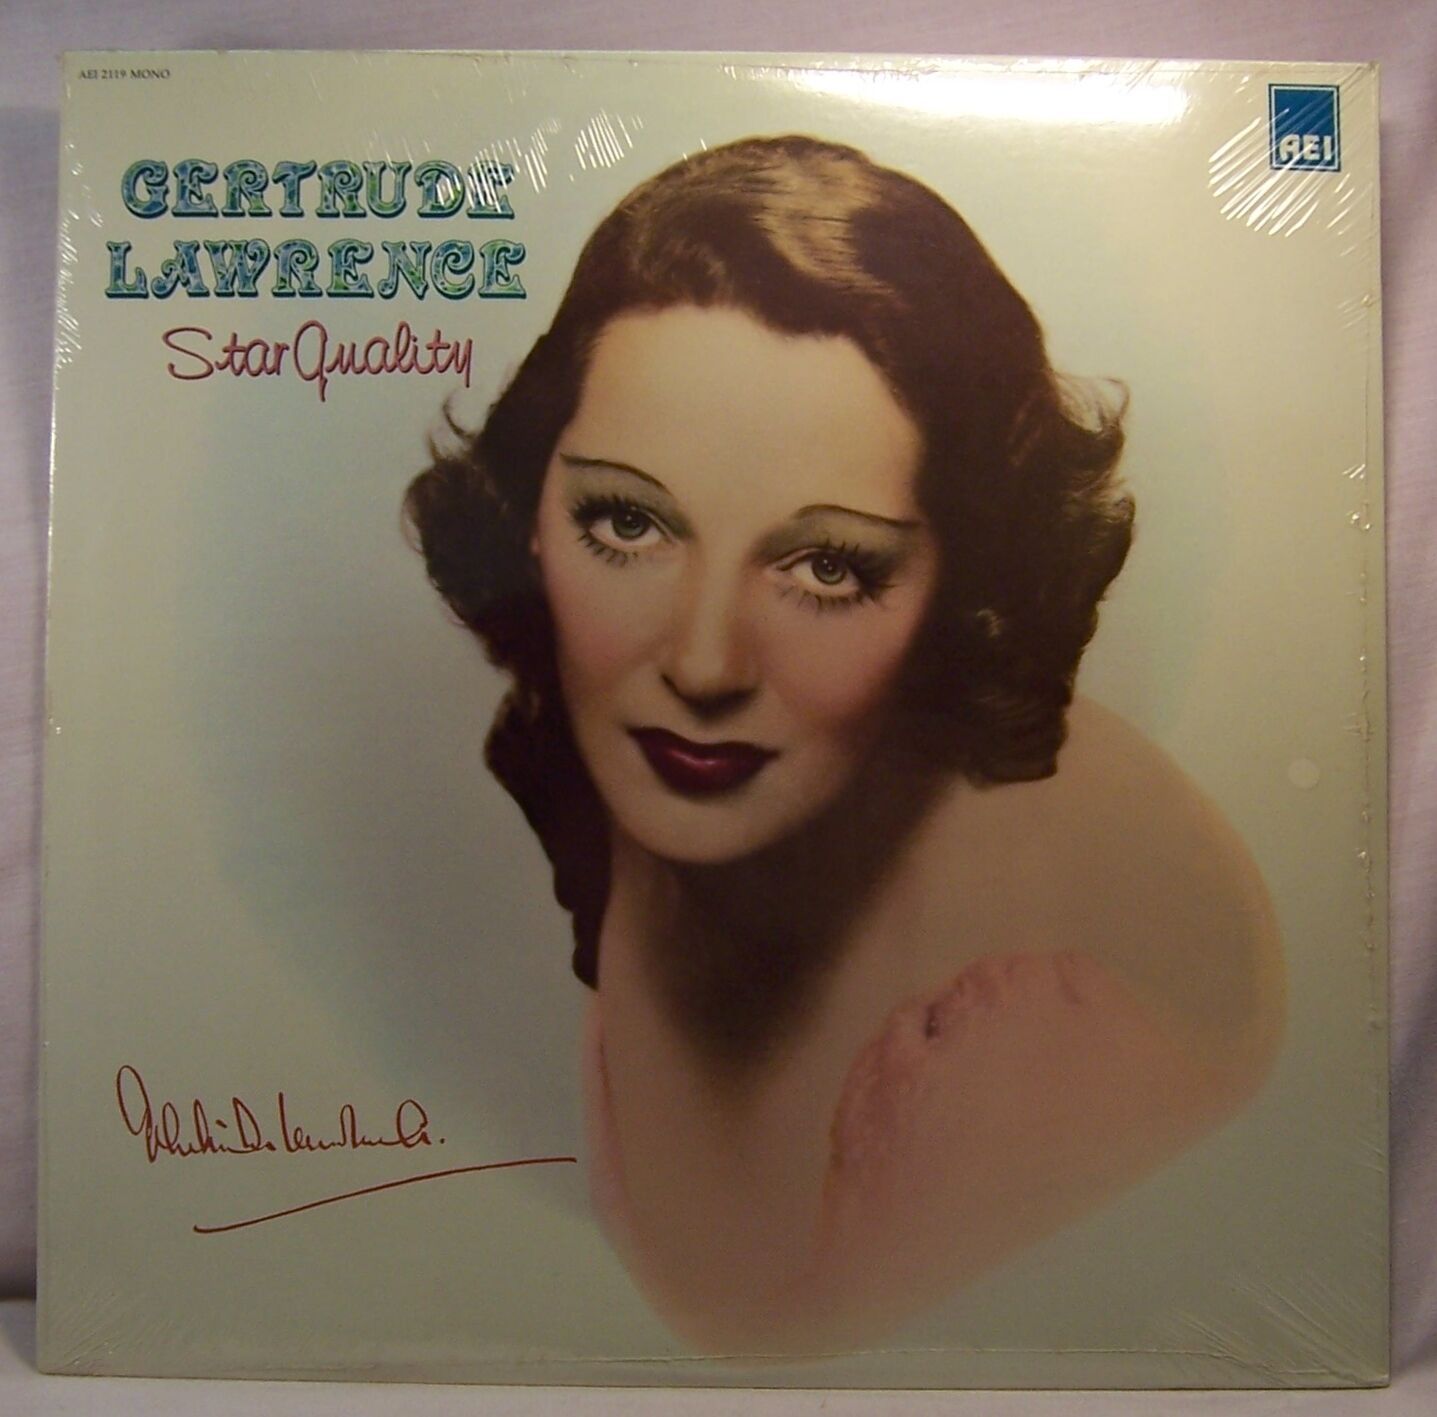 Primary image for GERTRUDE LAWRENCE STAR QUALITY Mint/Sealed Musical Cast Compilation LP